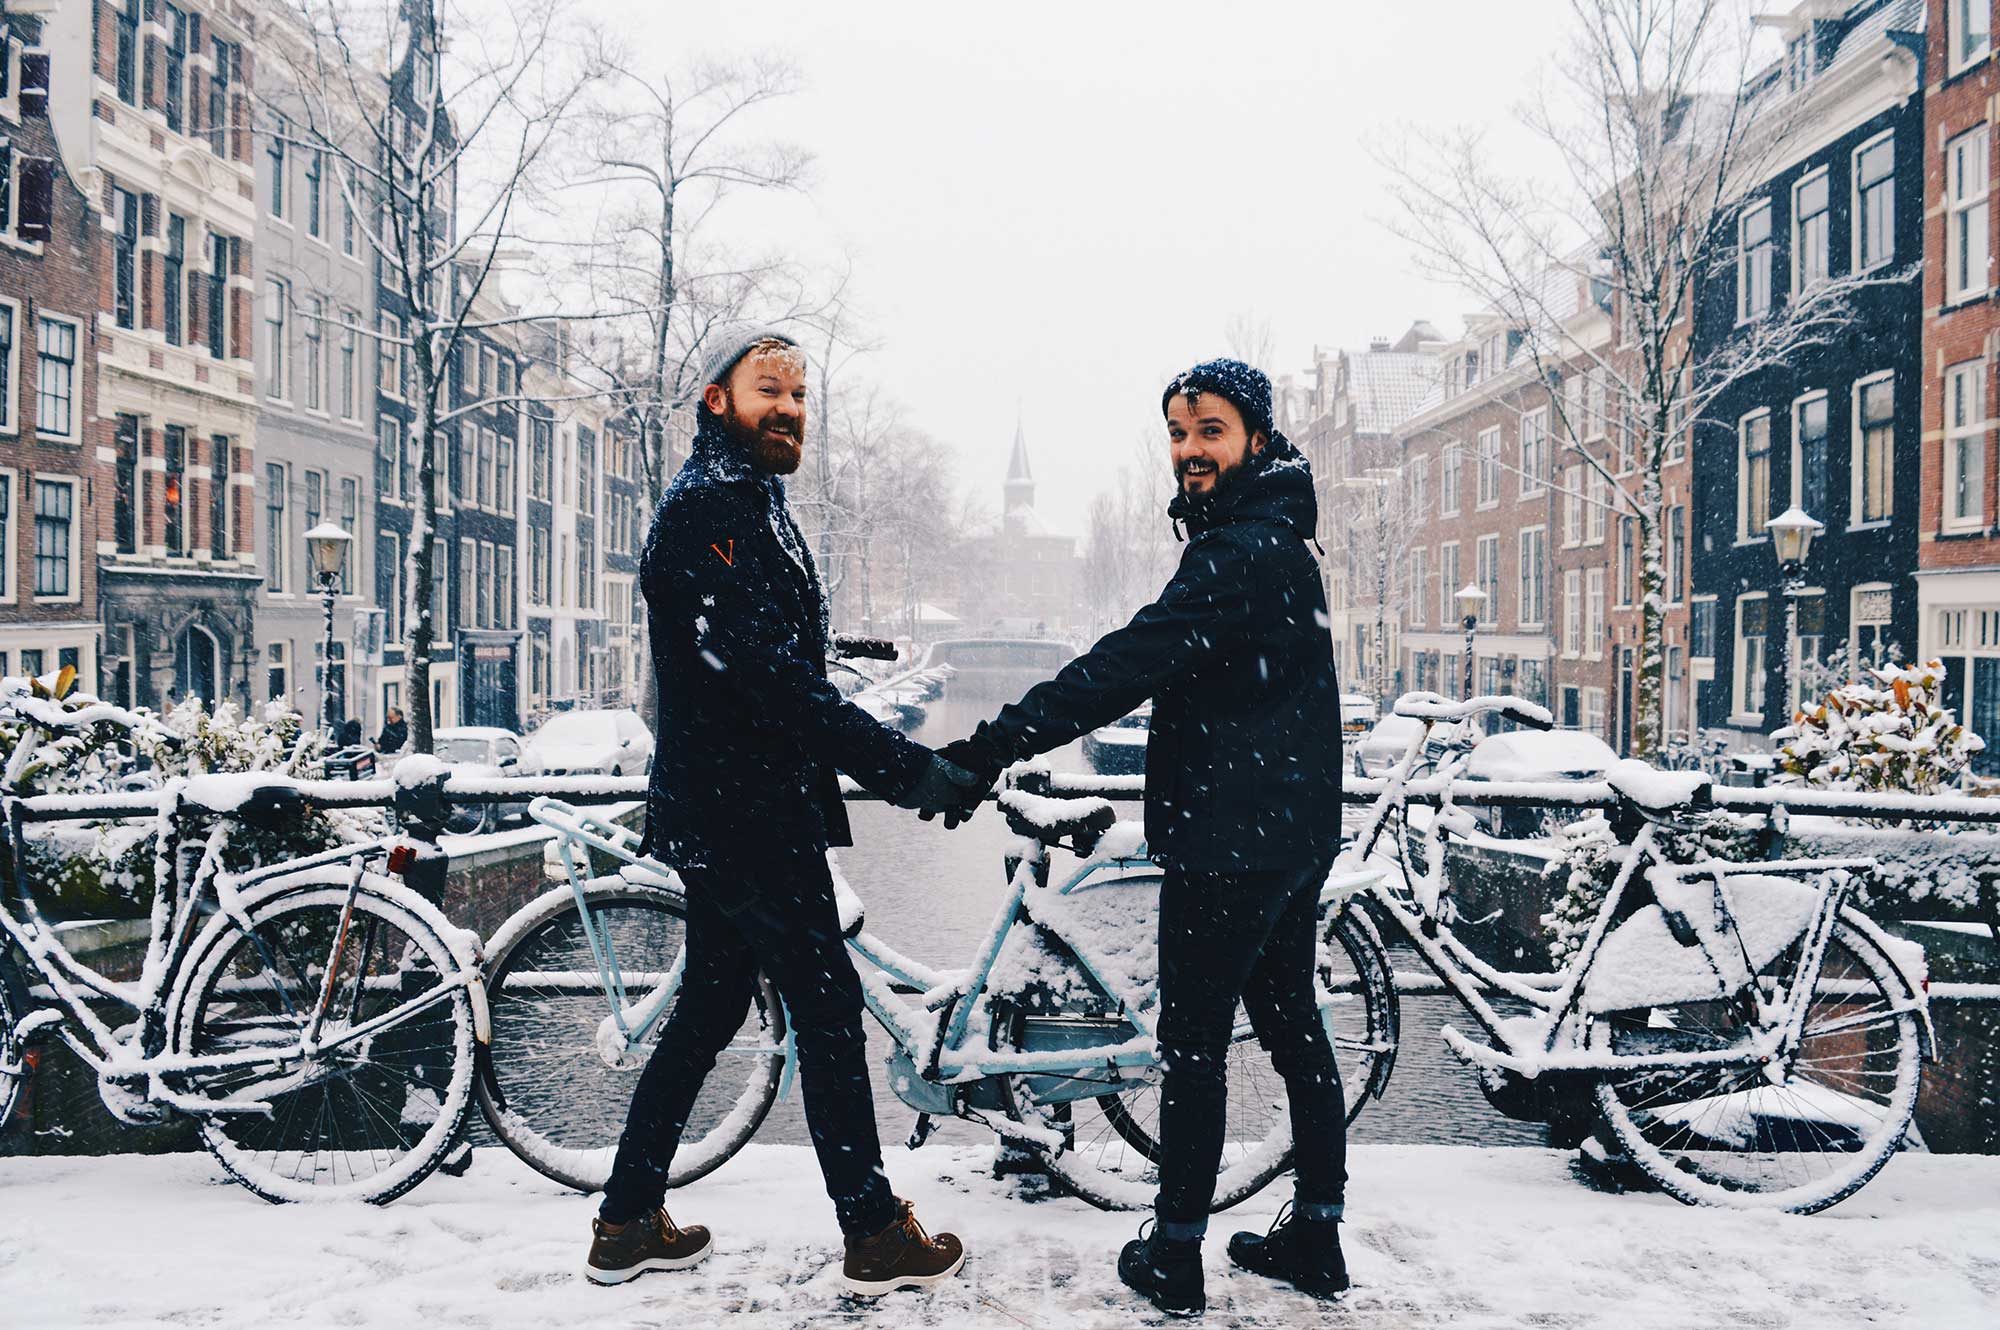 Let us show you a snowy Winter day in Amsterdam © Coupleofmen.com